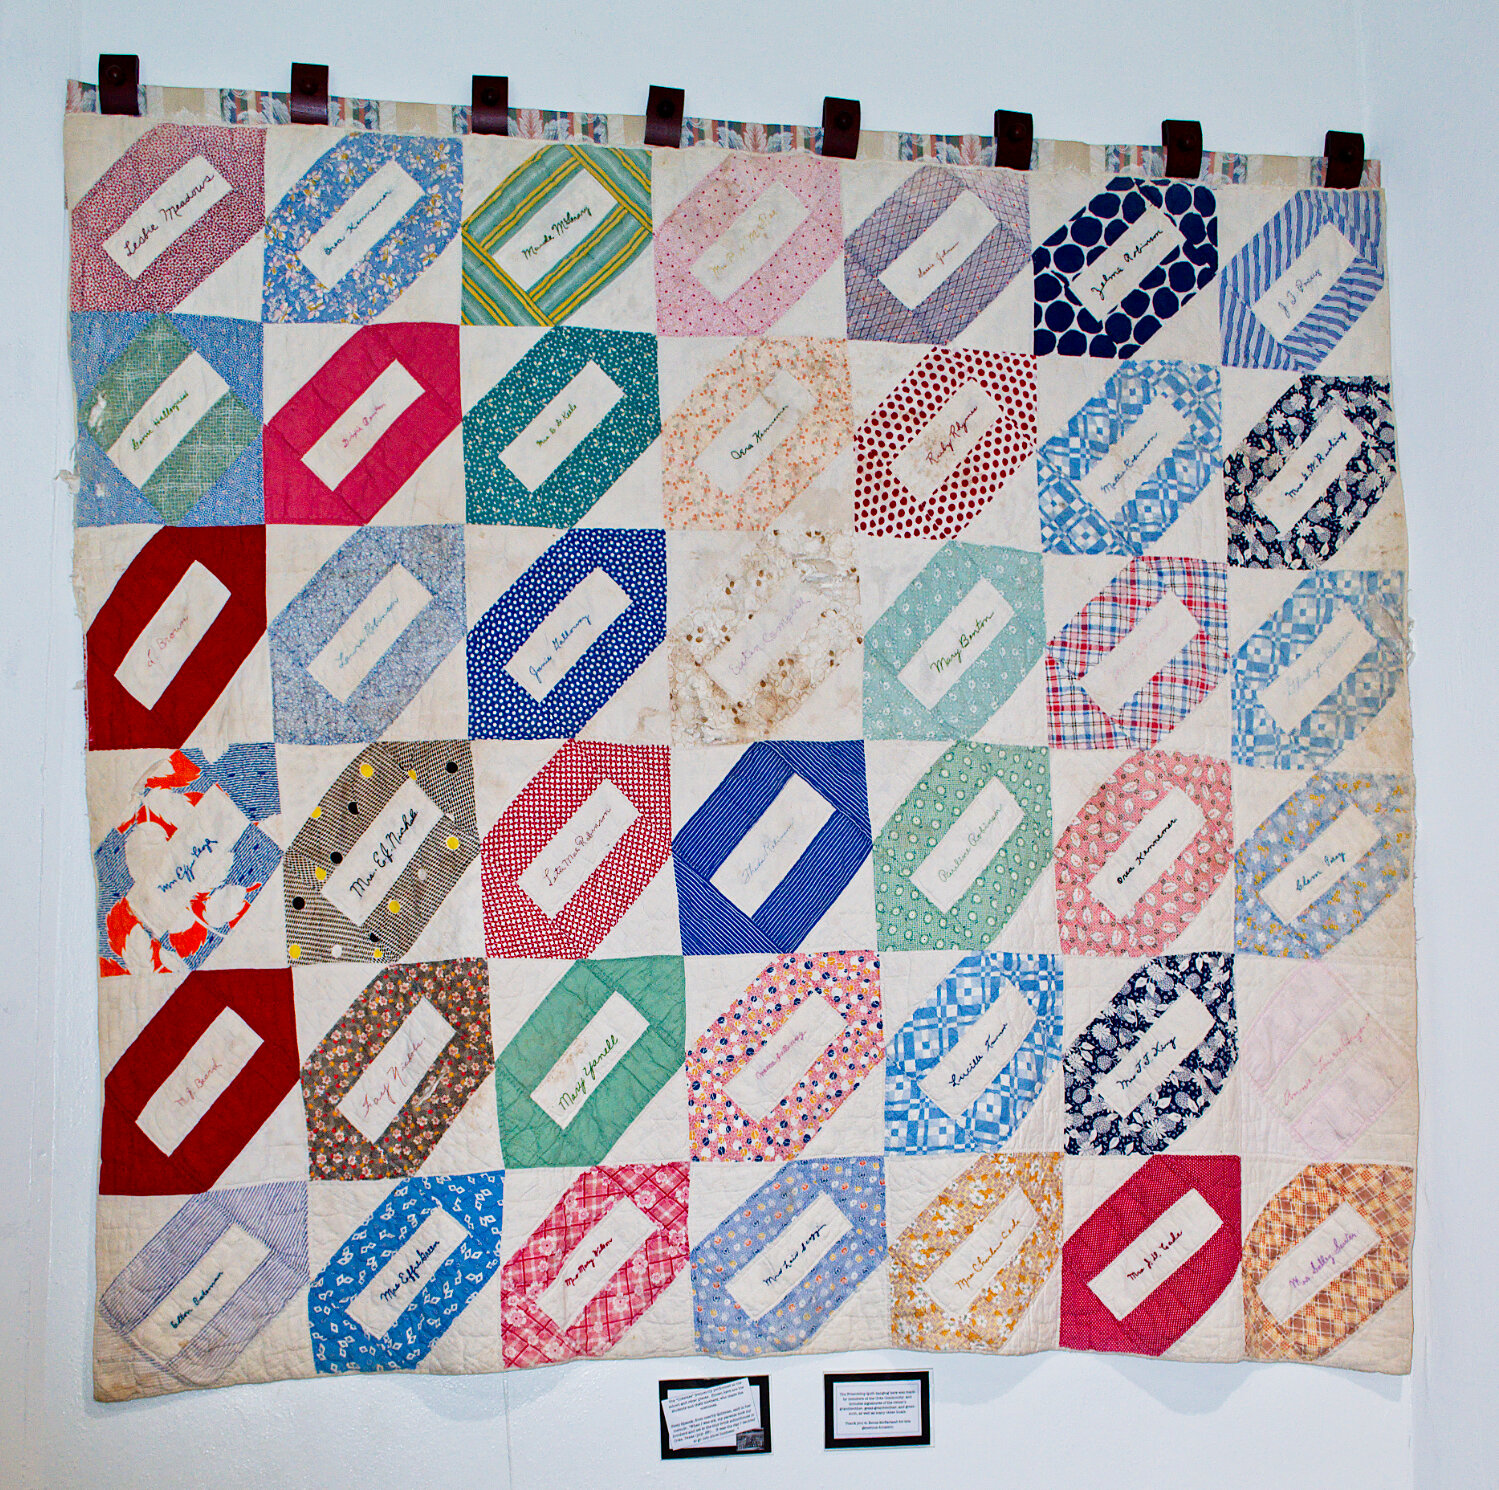 A friendship quilt from the Coke community contains many familiar family names. It has a place of honor in the old school auditorium.